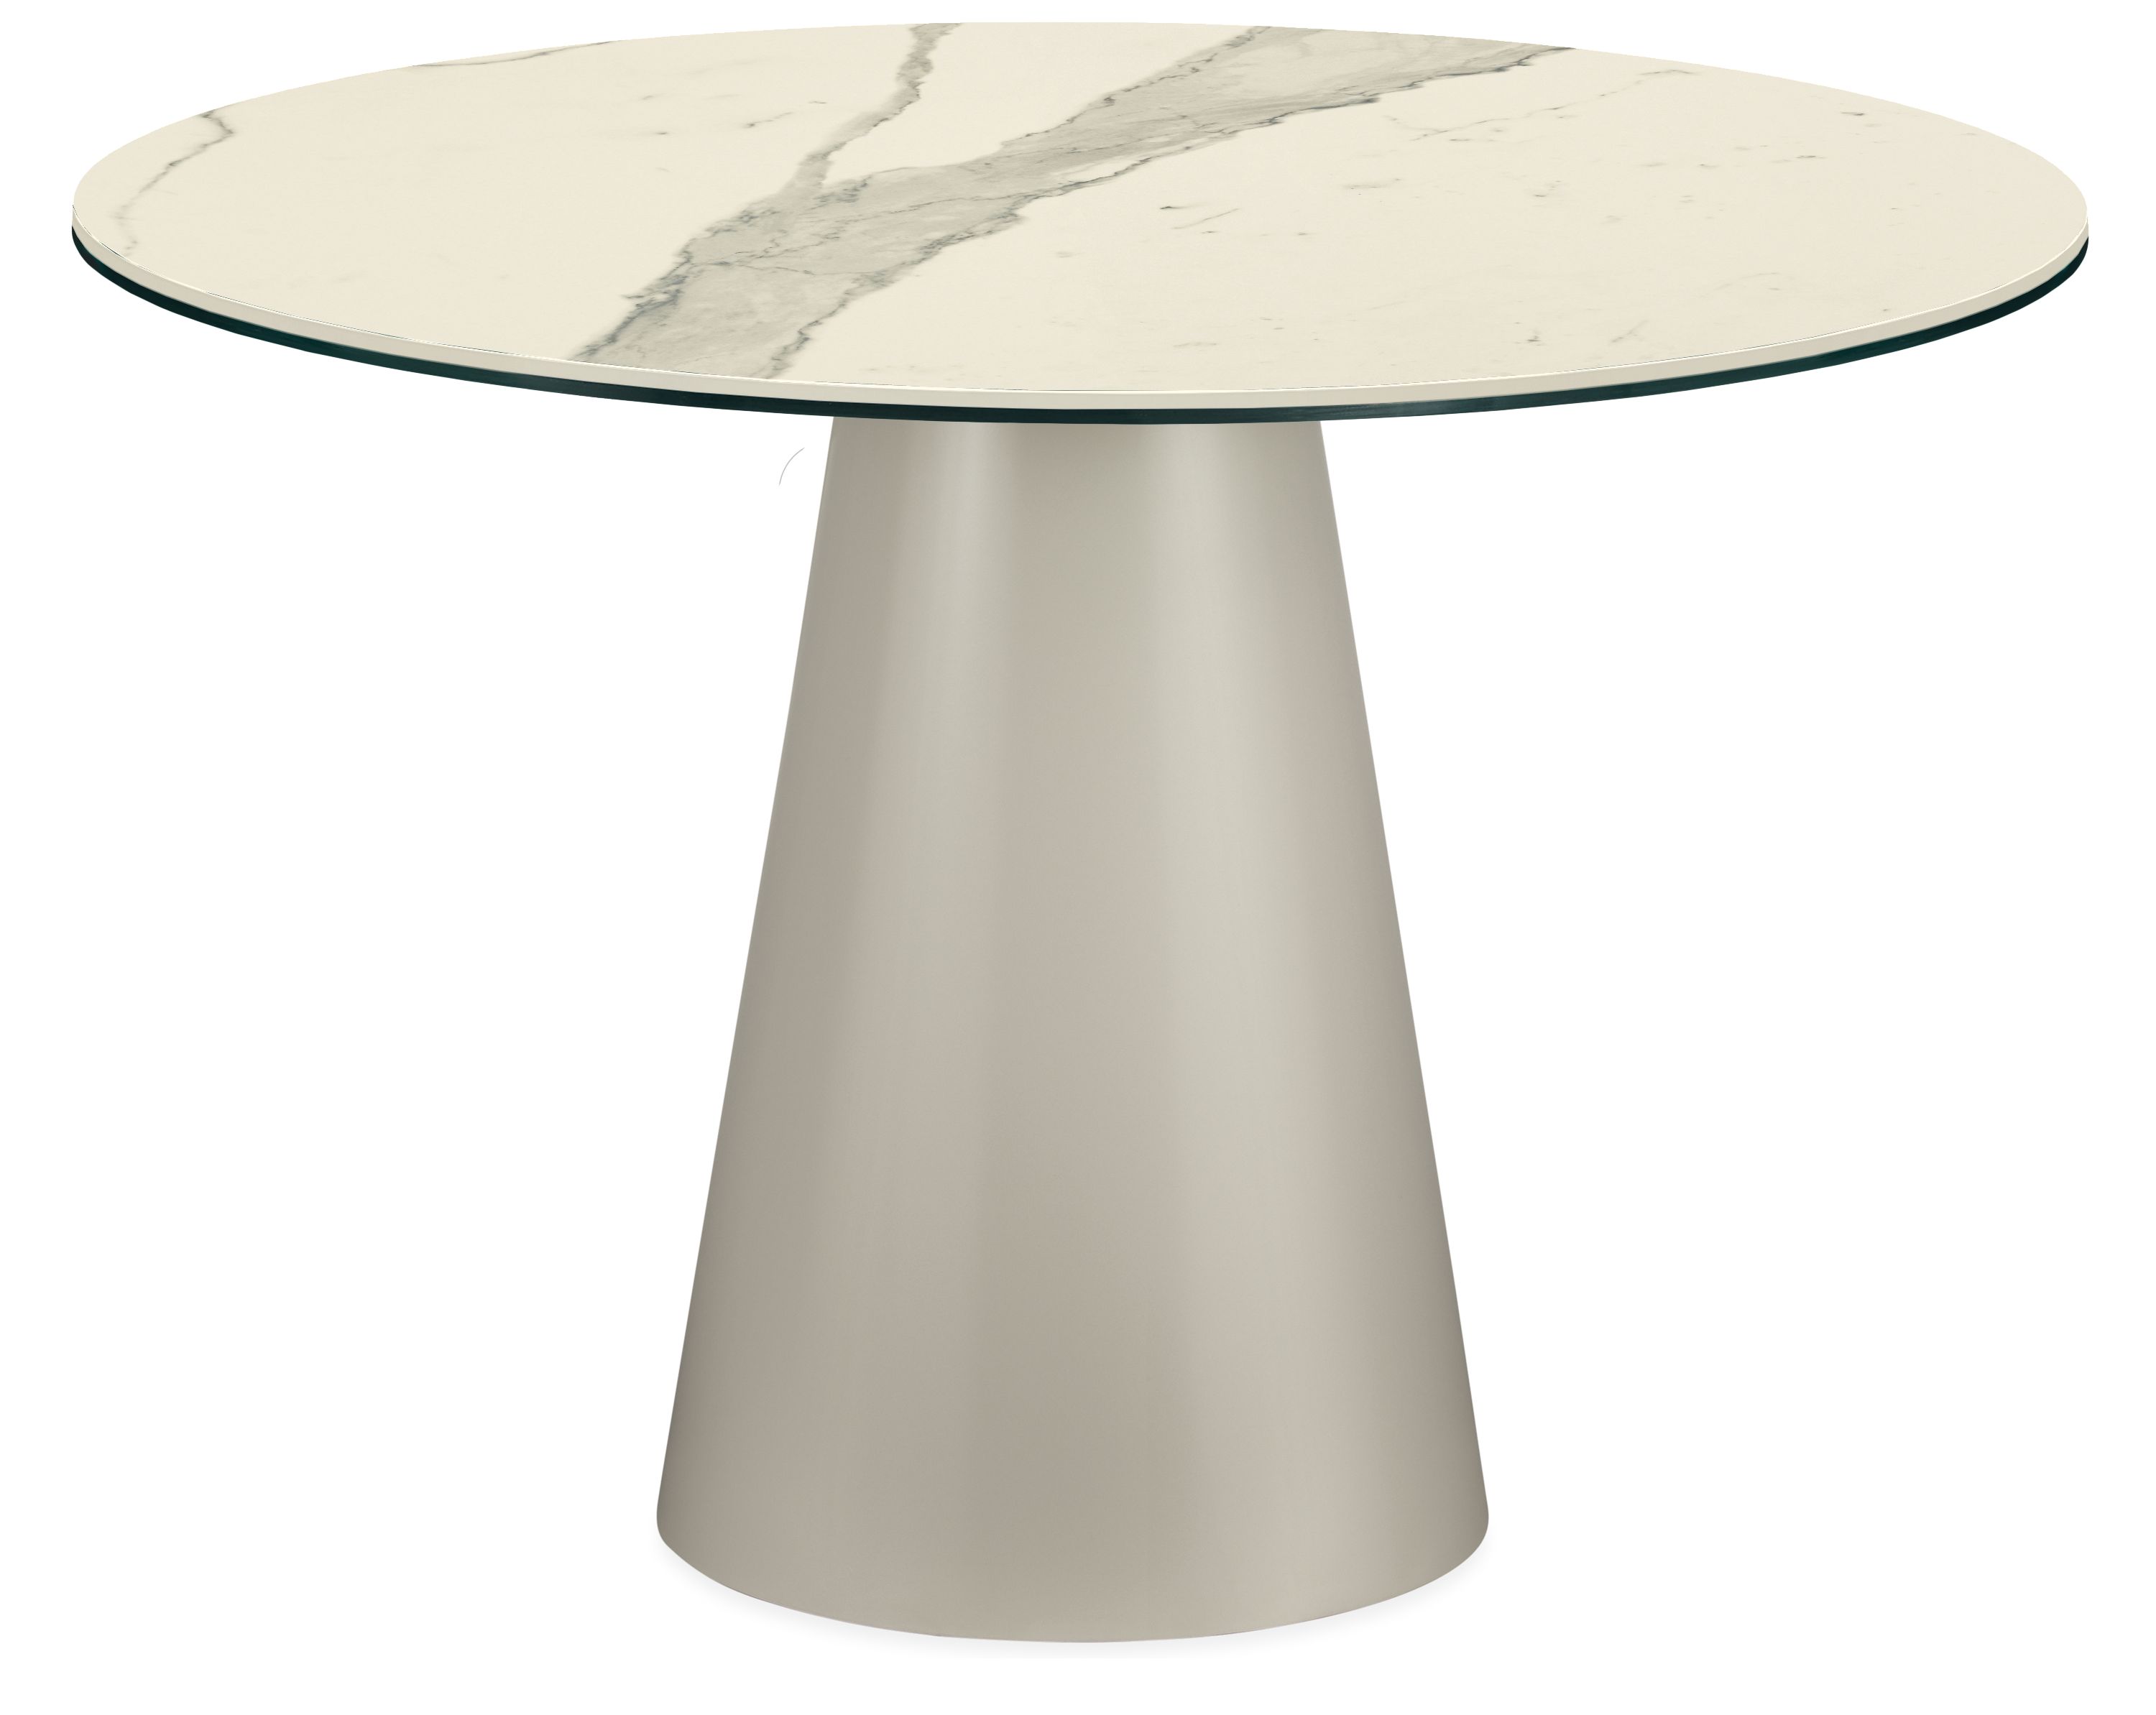 Decker Tables Modern Dining Room, Round Table In Sunnyvale Ca